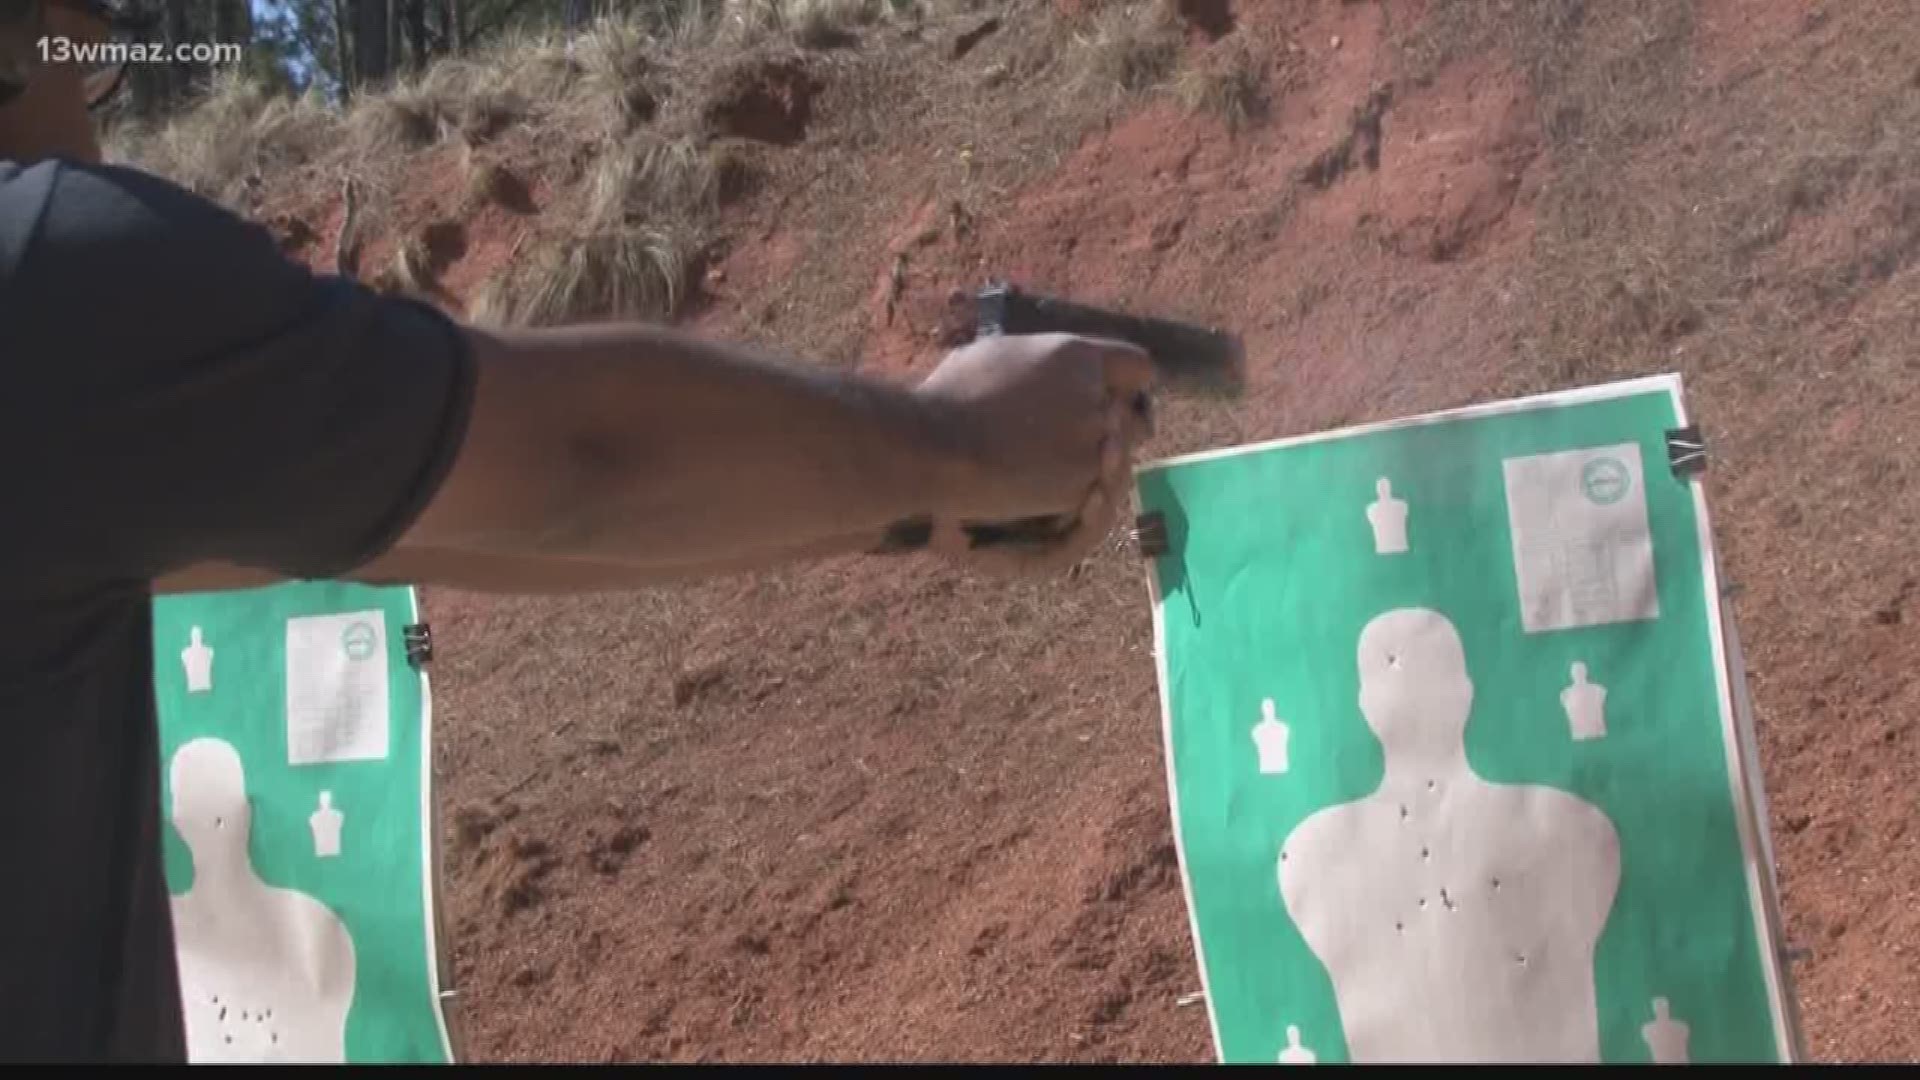 Monroe County training officers to use new guns